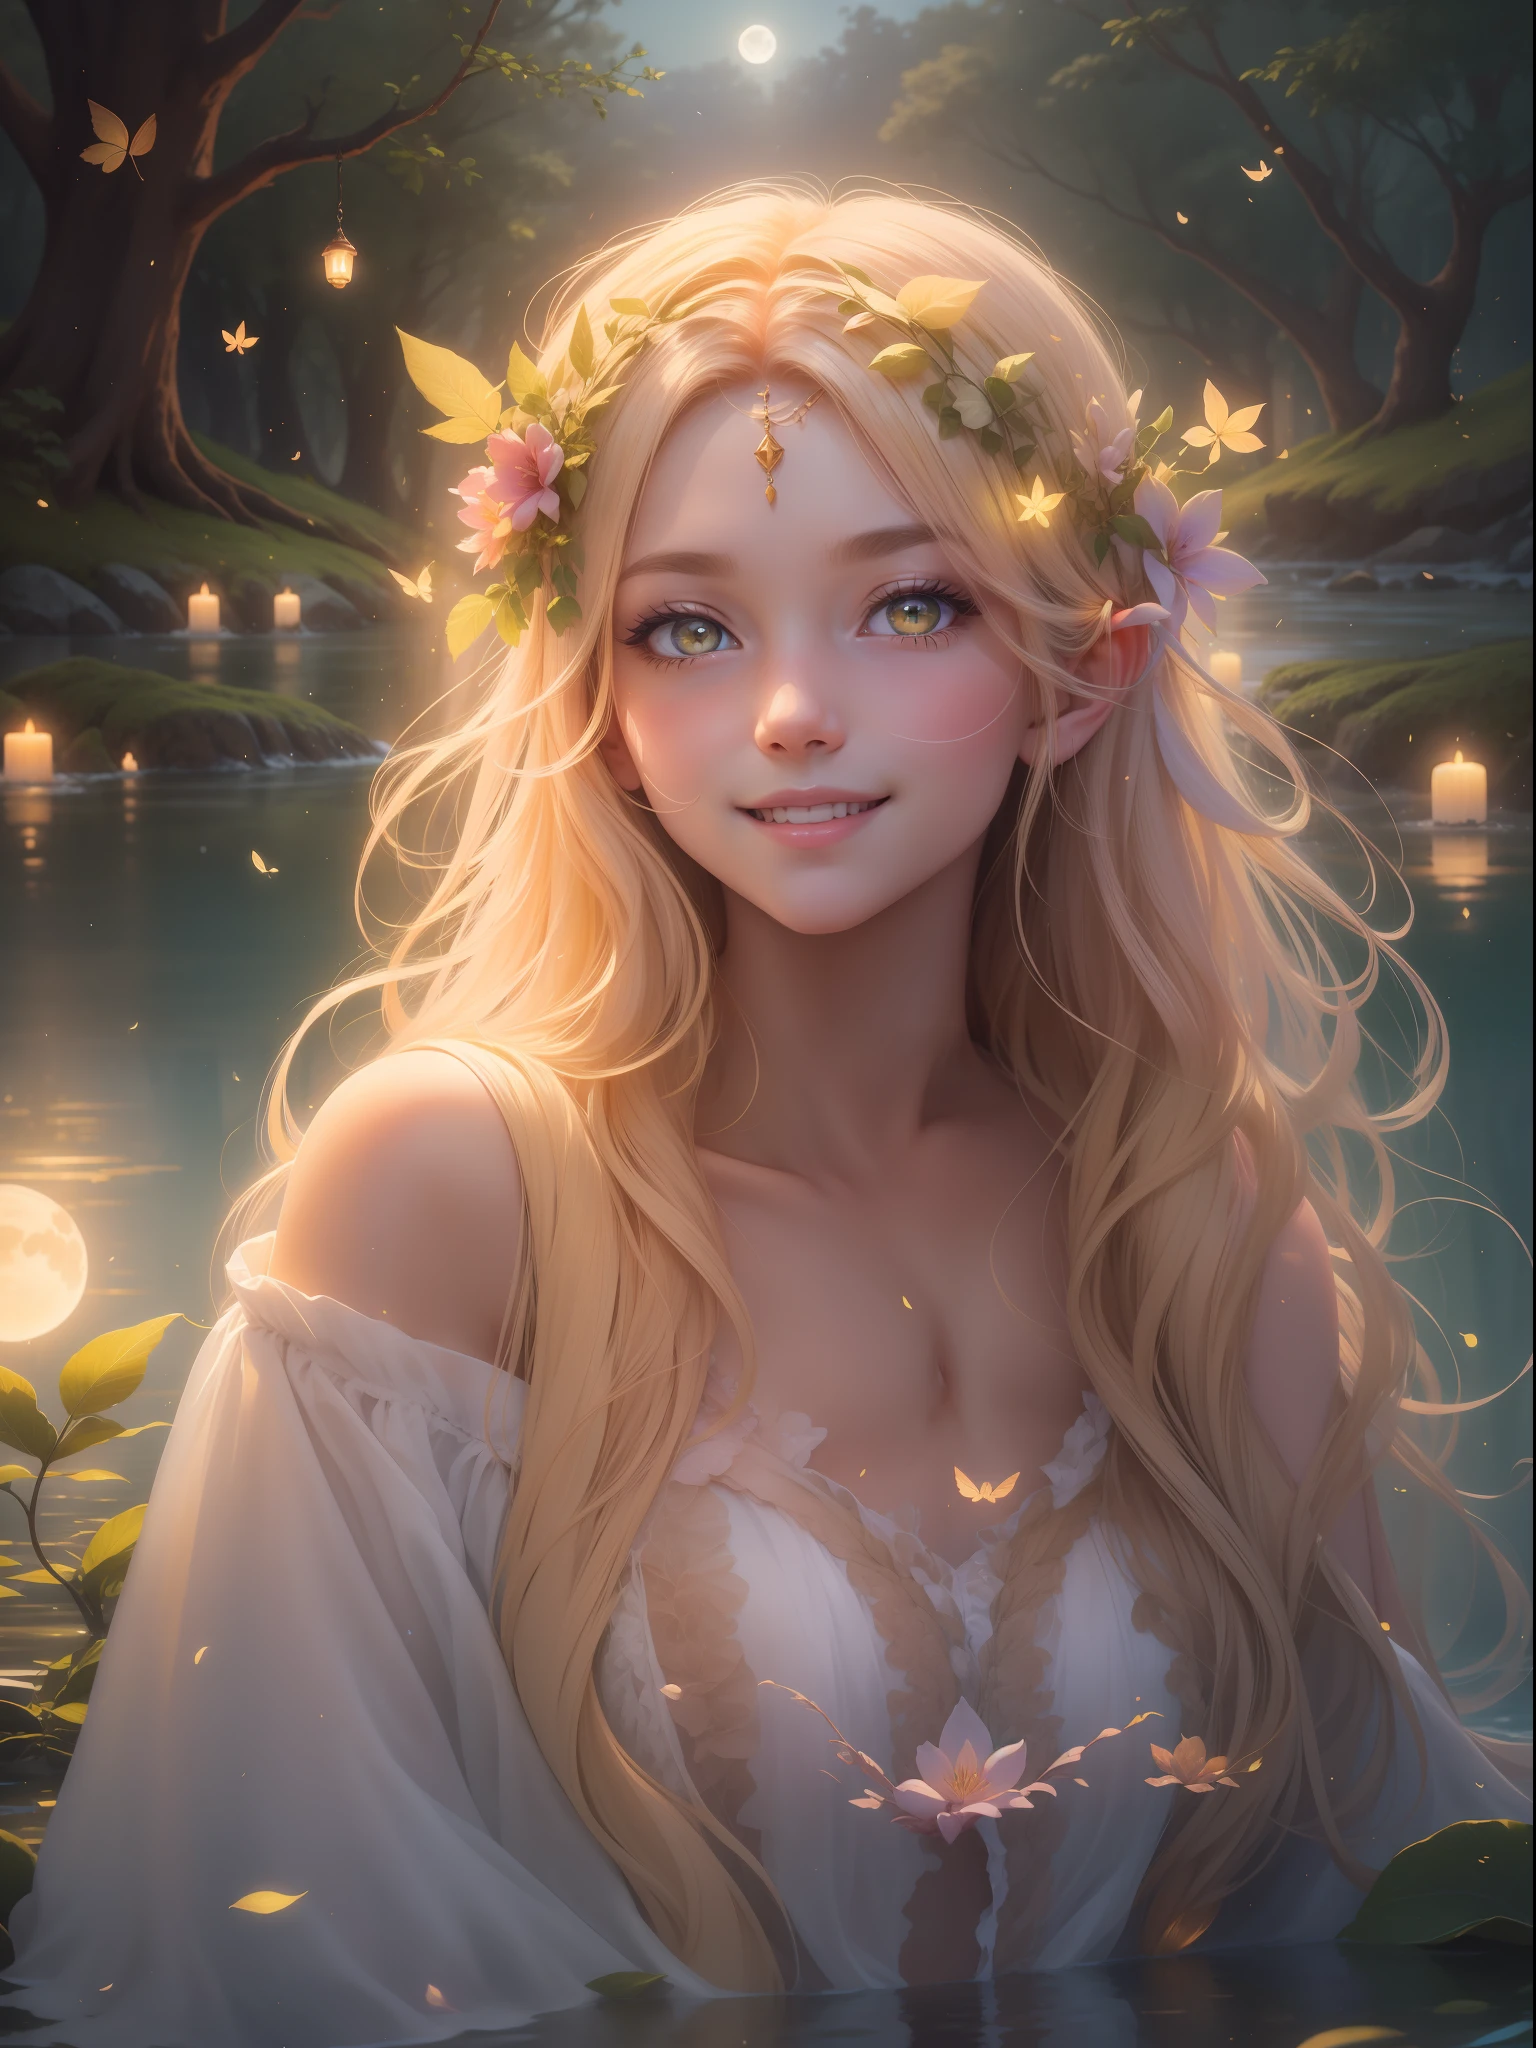 --Nymph --graceful --fluttering --bright eyes --radiant skin --golden hair --charming smile --bathing in soft moonlight,
--Scenery --magical --enchanted forest --soft moonlight --lake,
--Aura --serene --ancestral mystery --ethereal beauty,